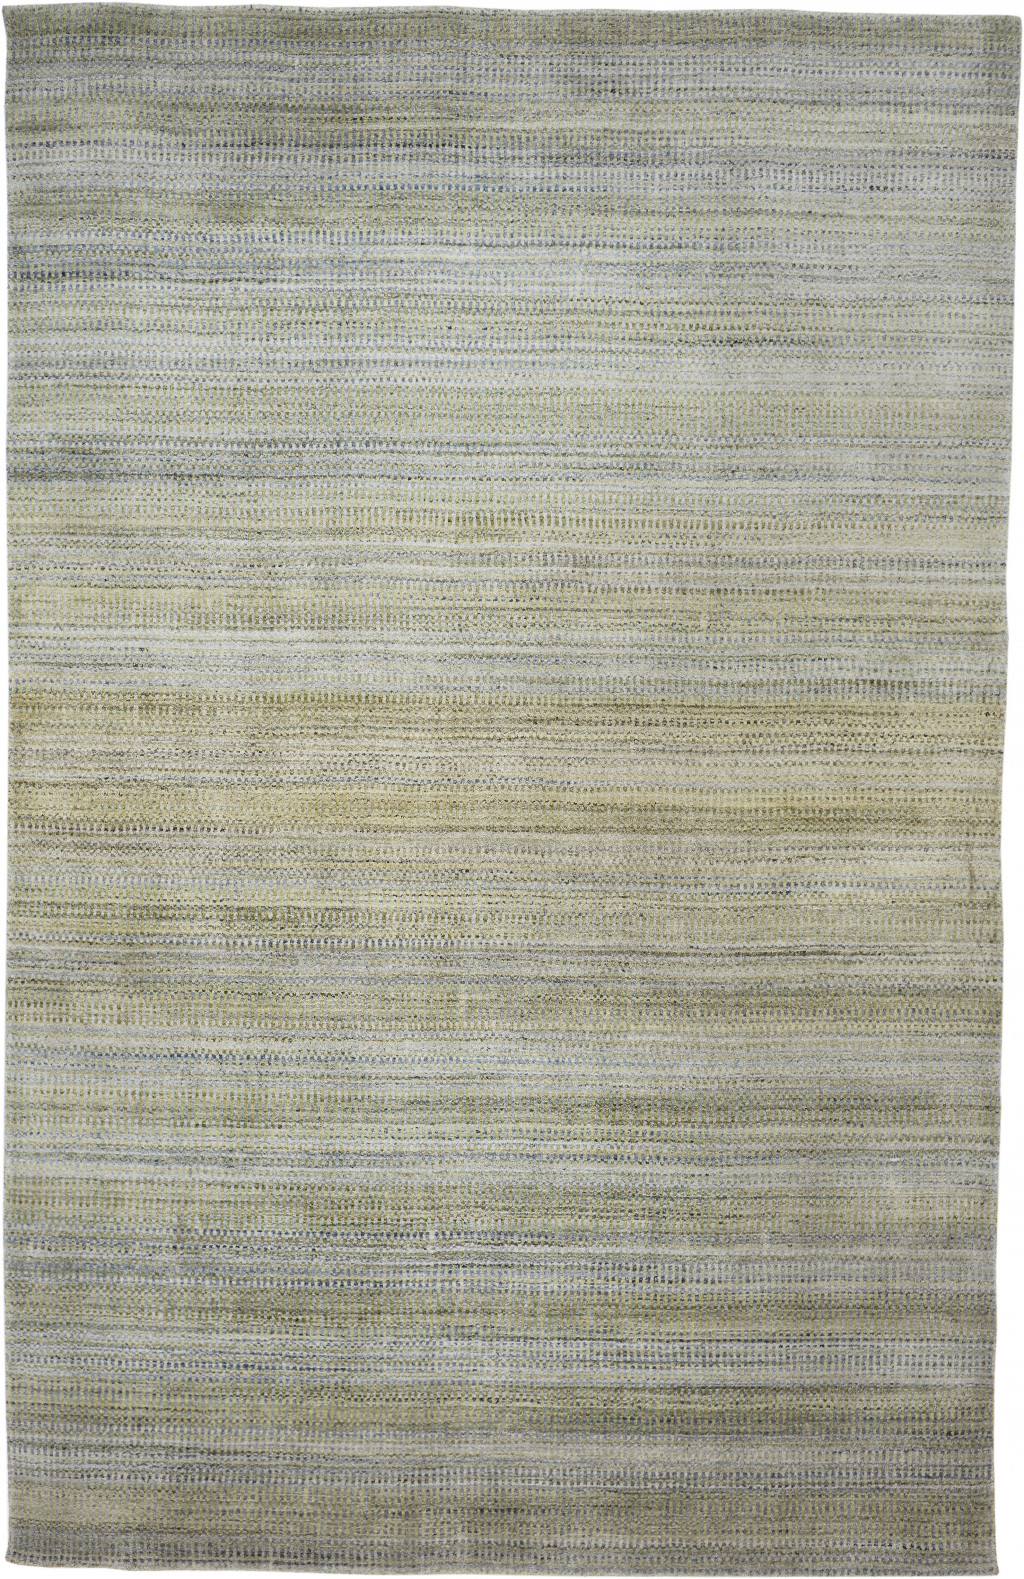 10' X 13' Green Blue And Tan Ombre Hand Woven Area Rug-511725-1